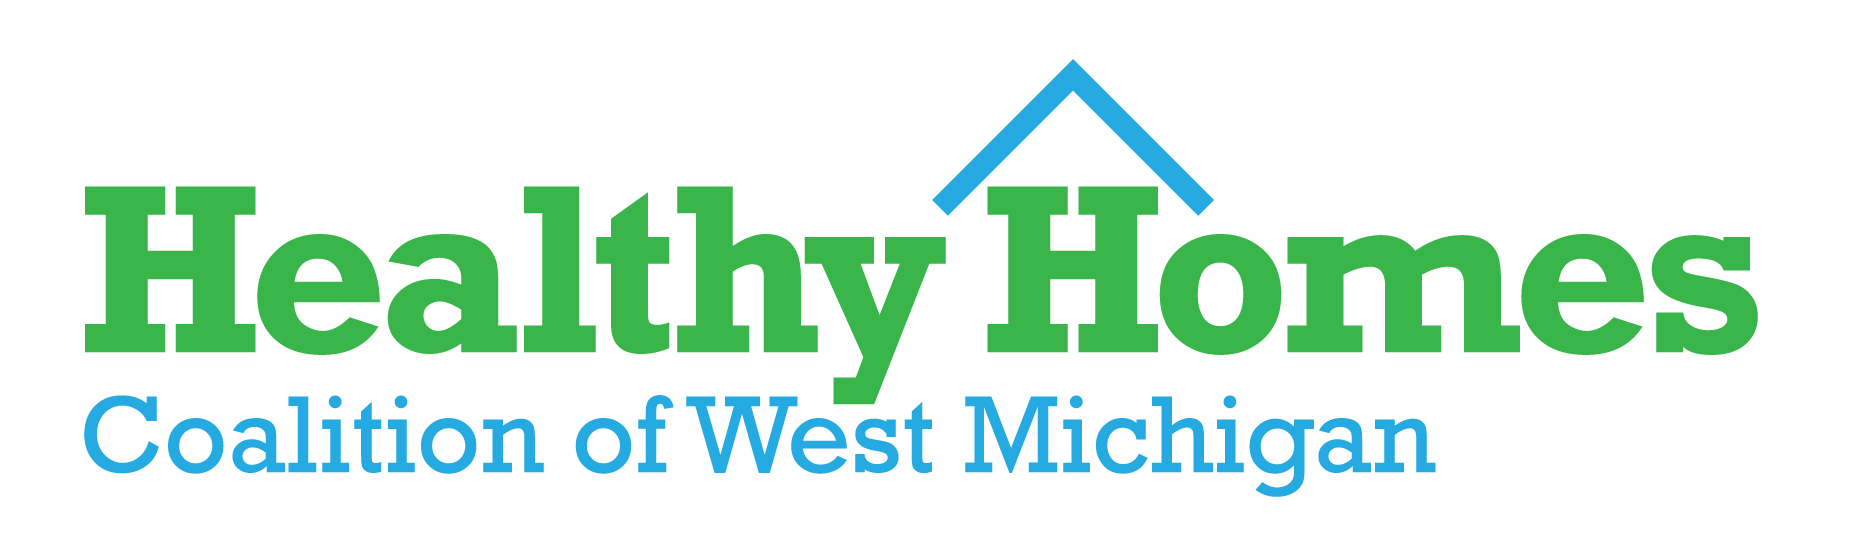 Healthy Homes Coalition of West Michigan logo